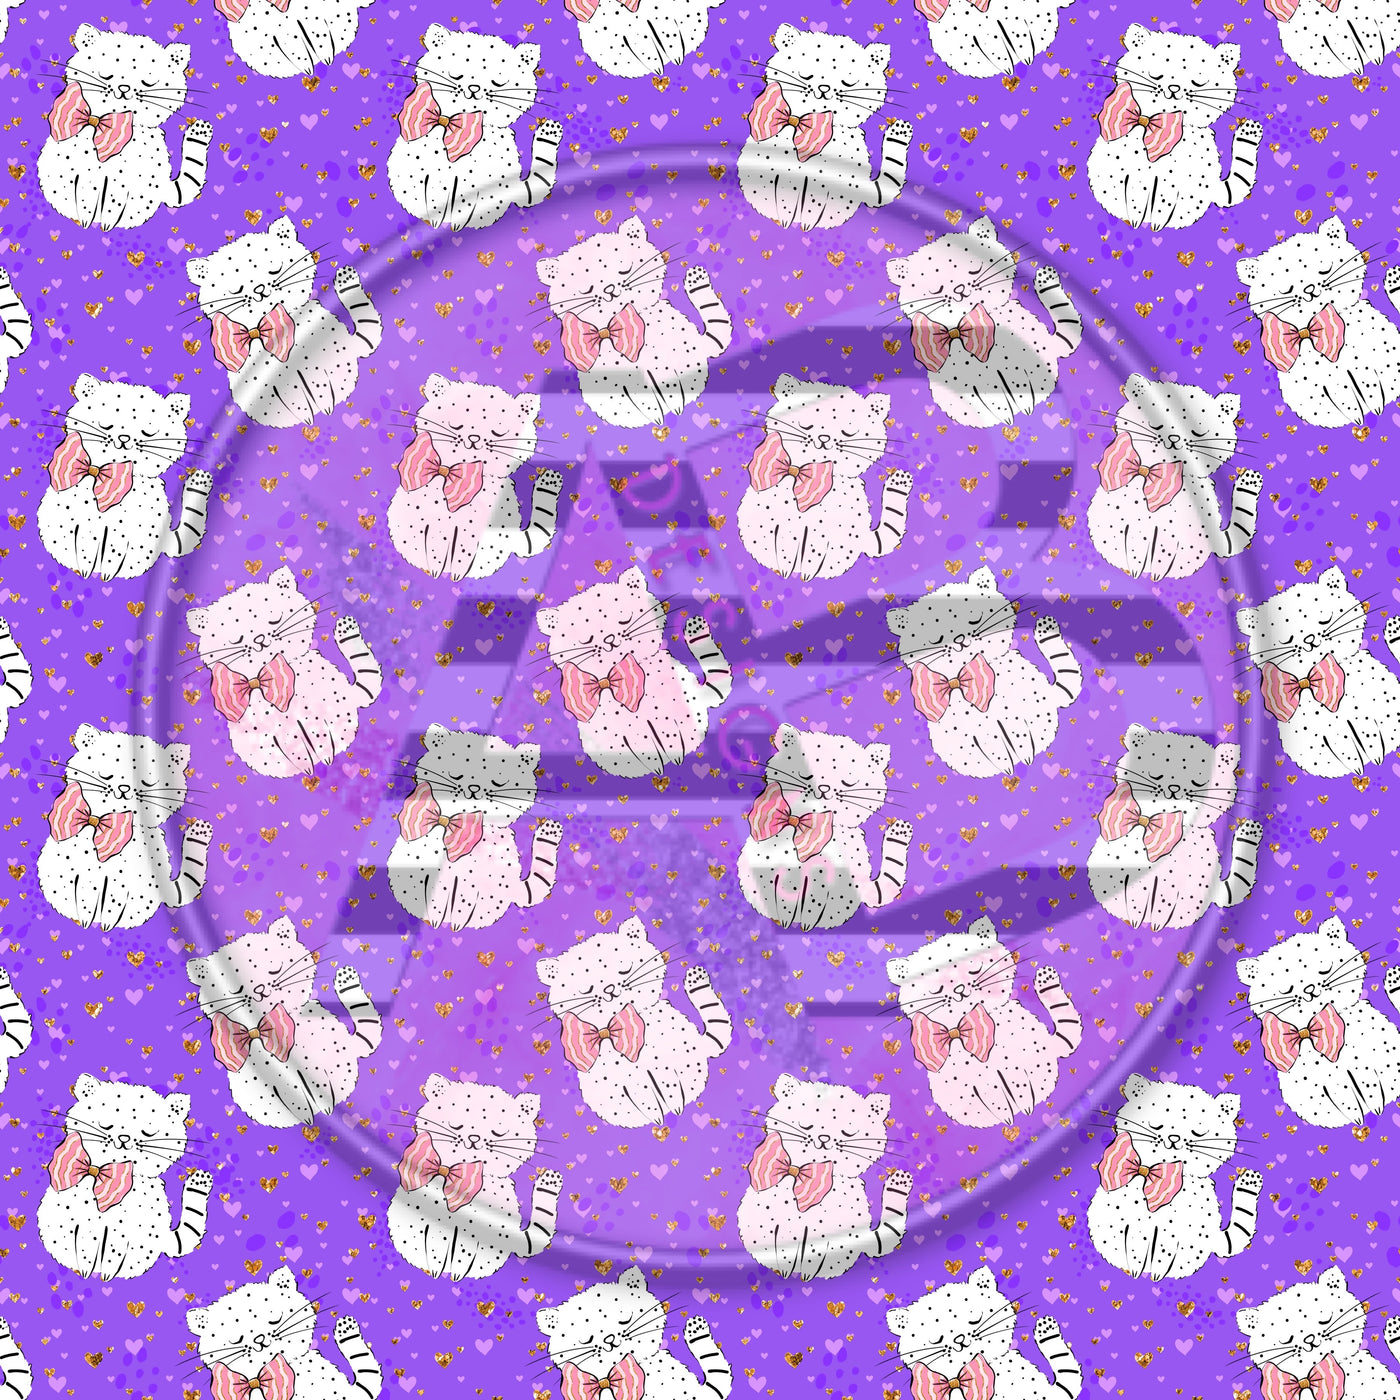 Adhesive Patterned Vinyl - Cats 852